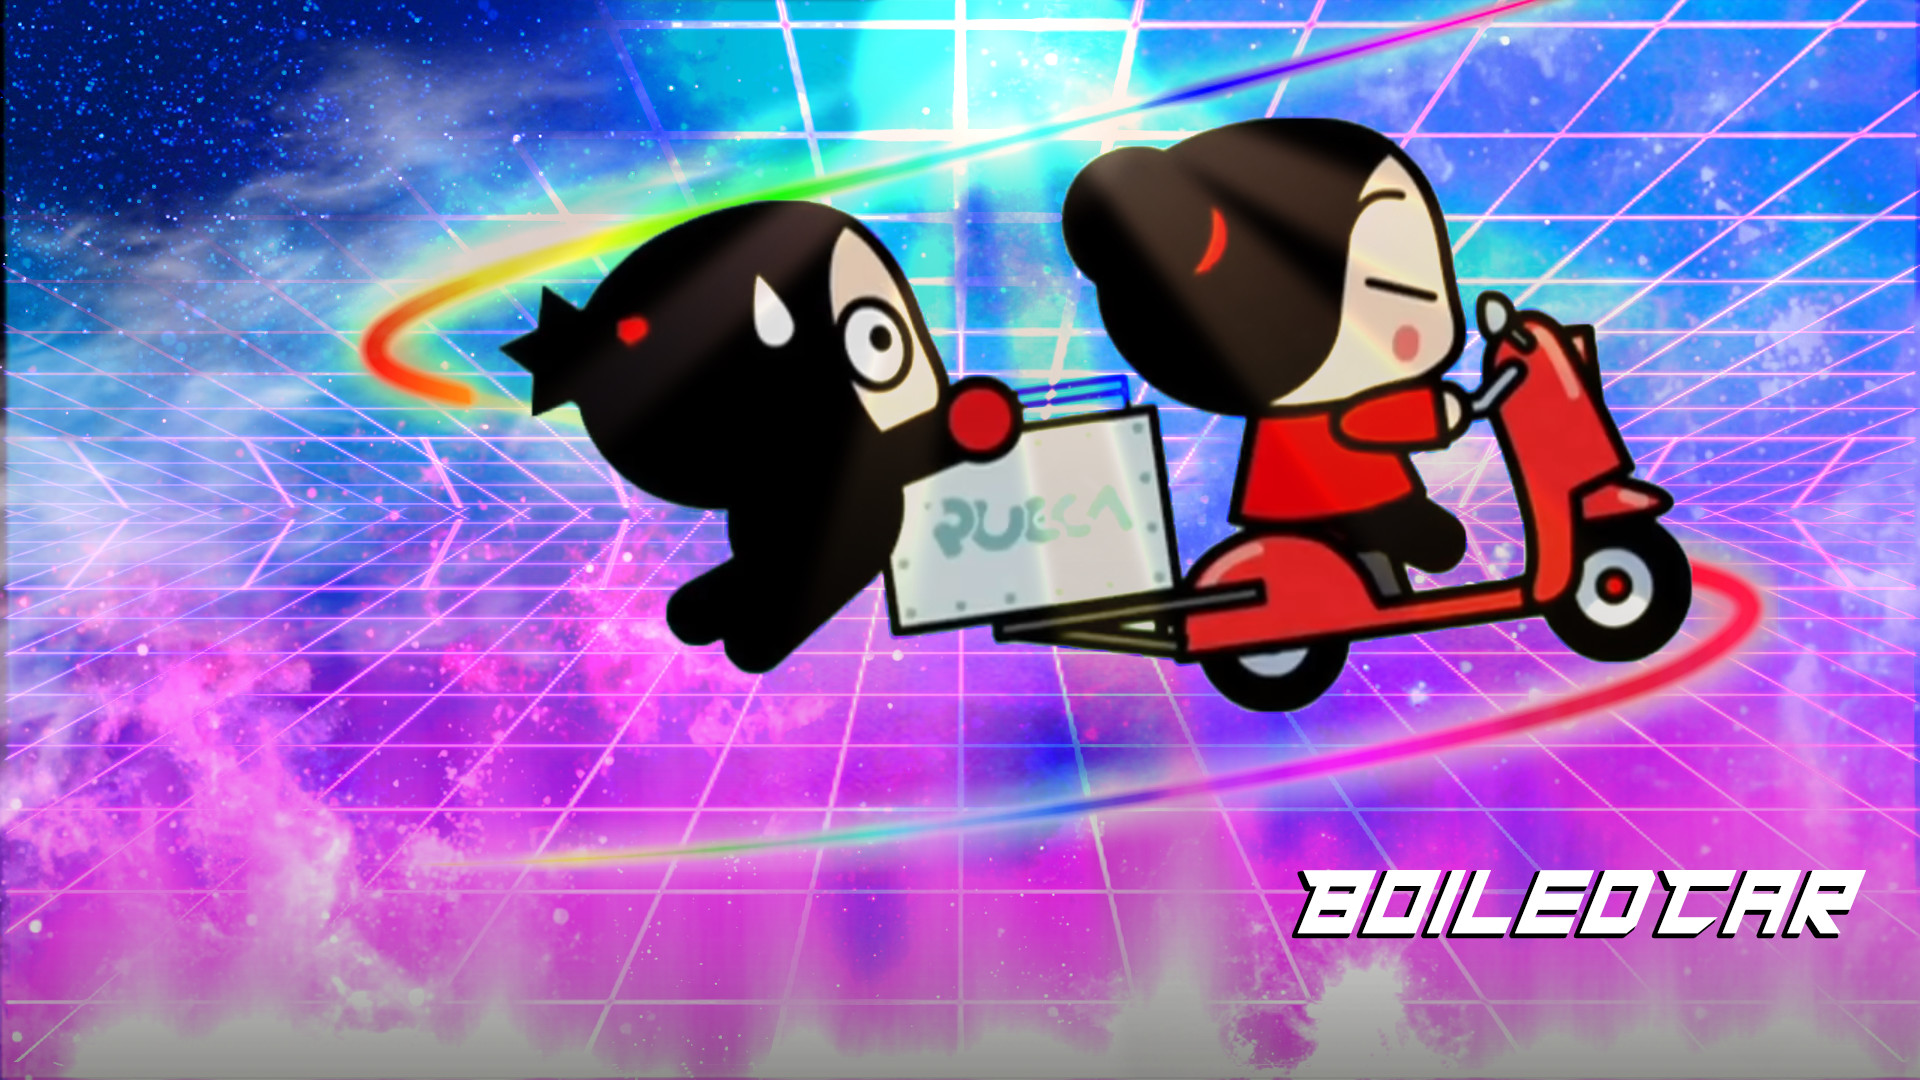 1920x1080 ... BoiledCar Pucca and Garu in another Relm by boiledcar